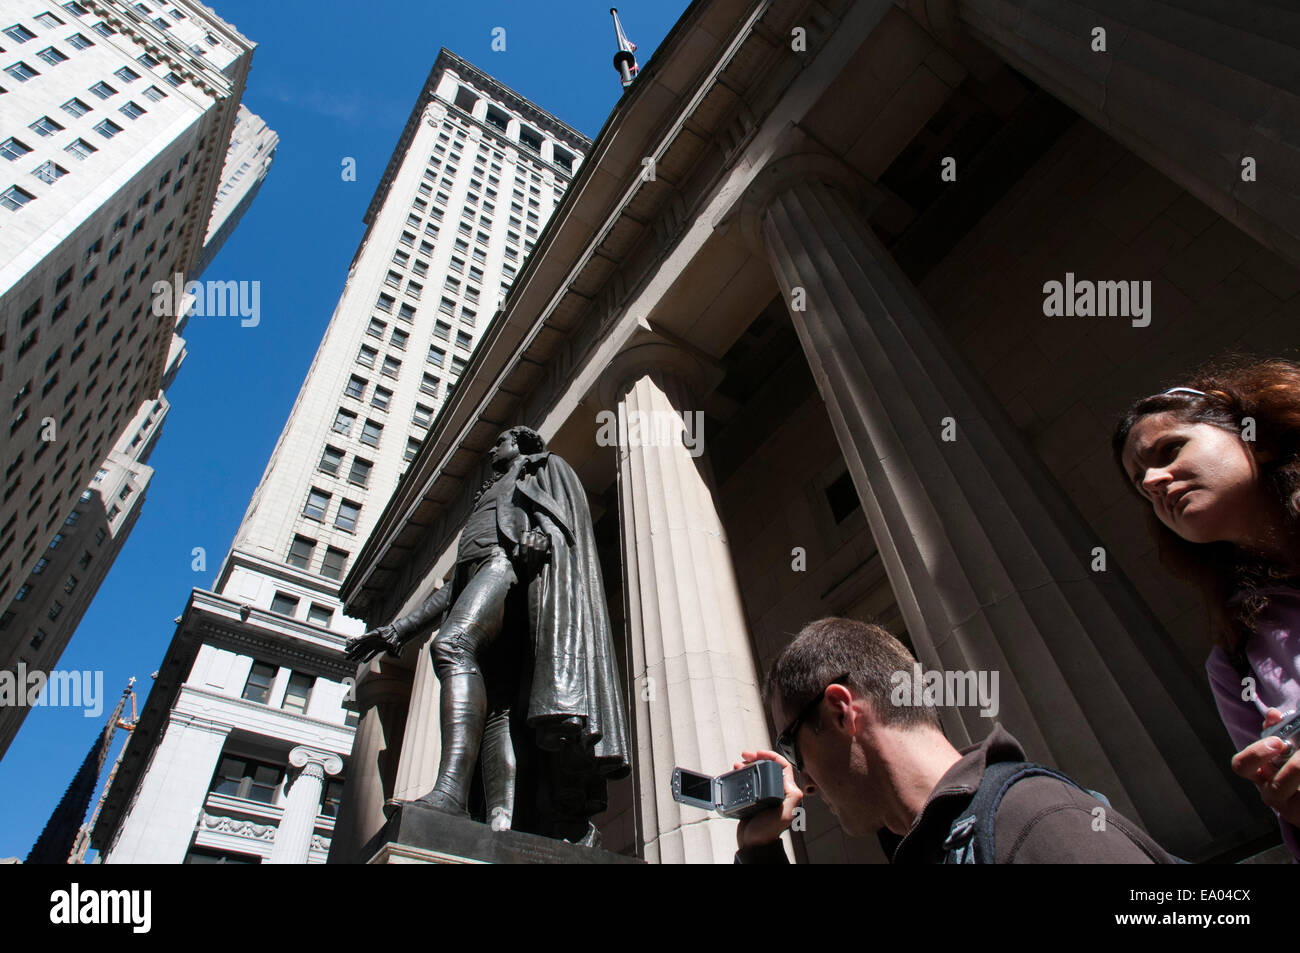 Statue of George Washington. Statue of George Washington in front of Federal Hall on Wall Street, Lower Manhattan, New York City Stock Photo